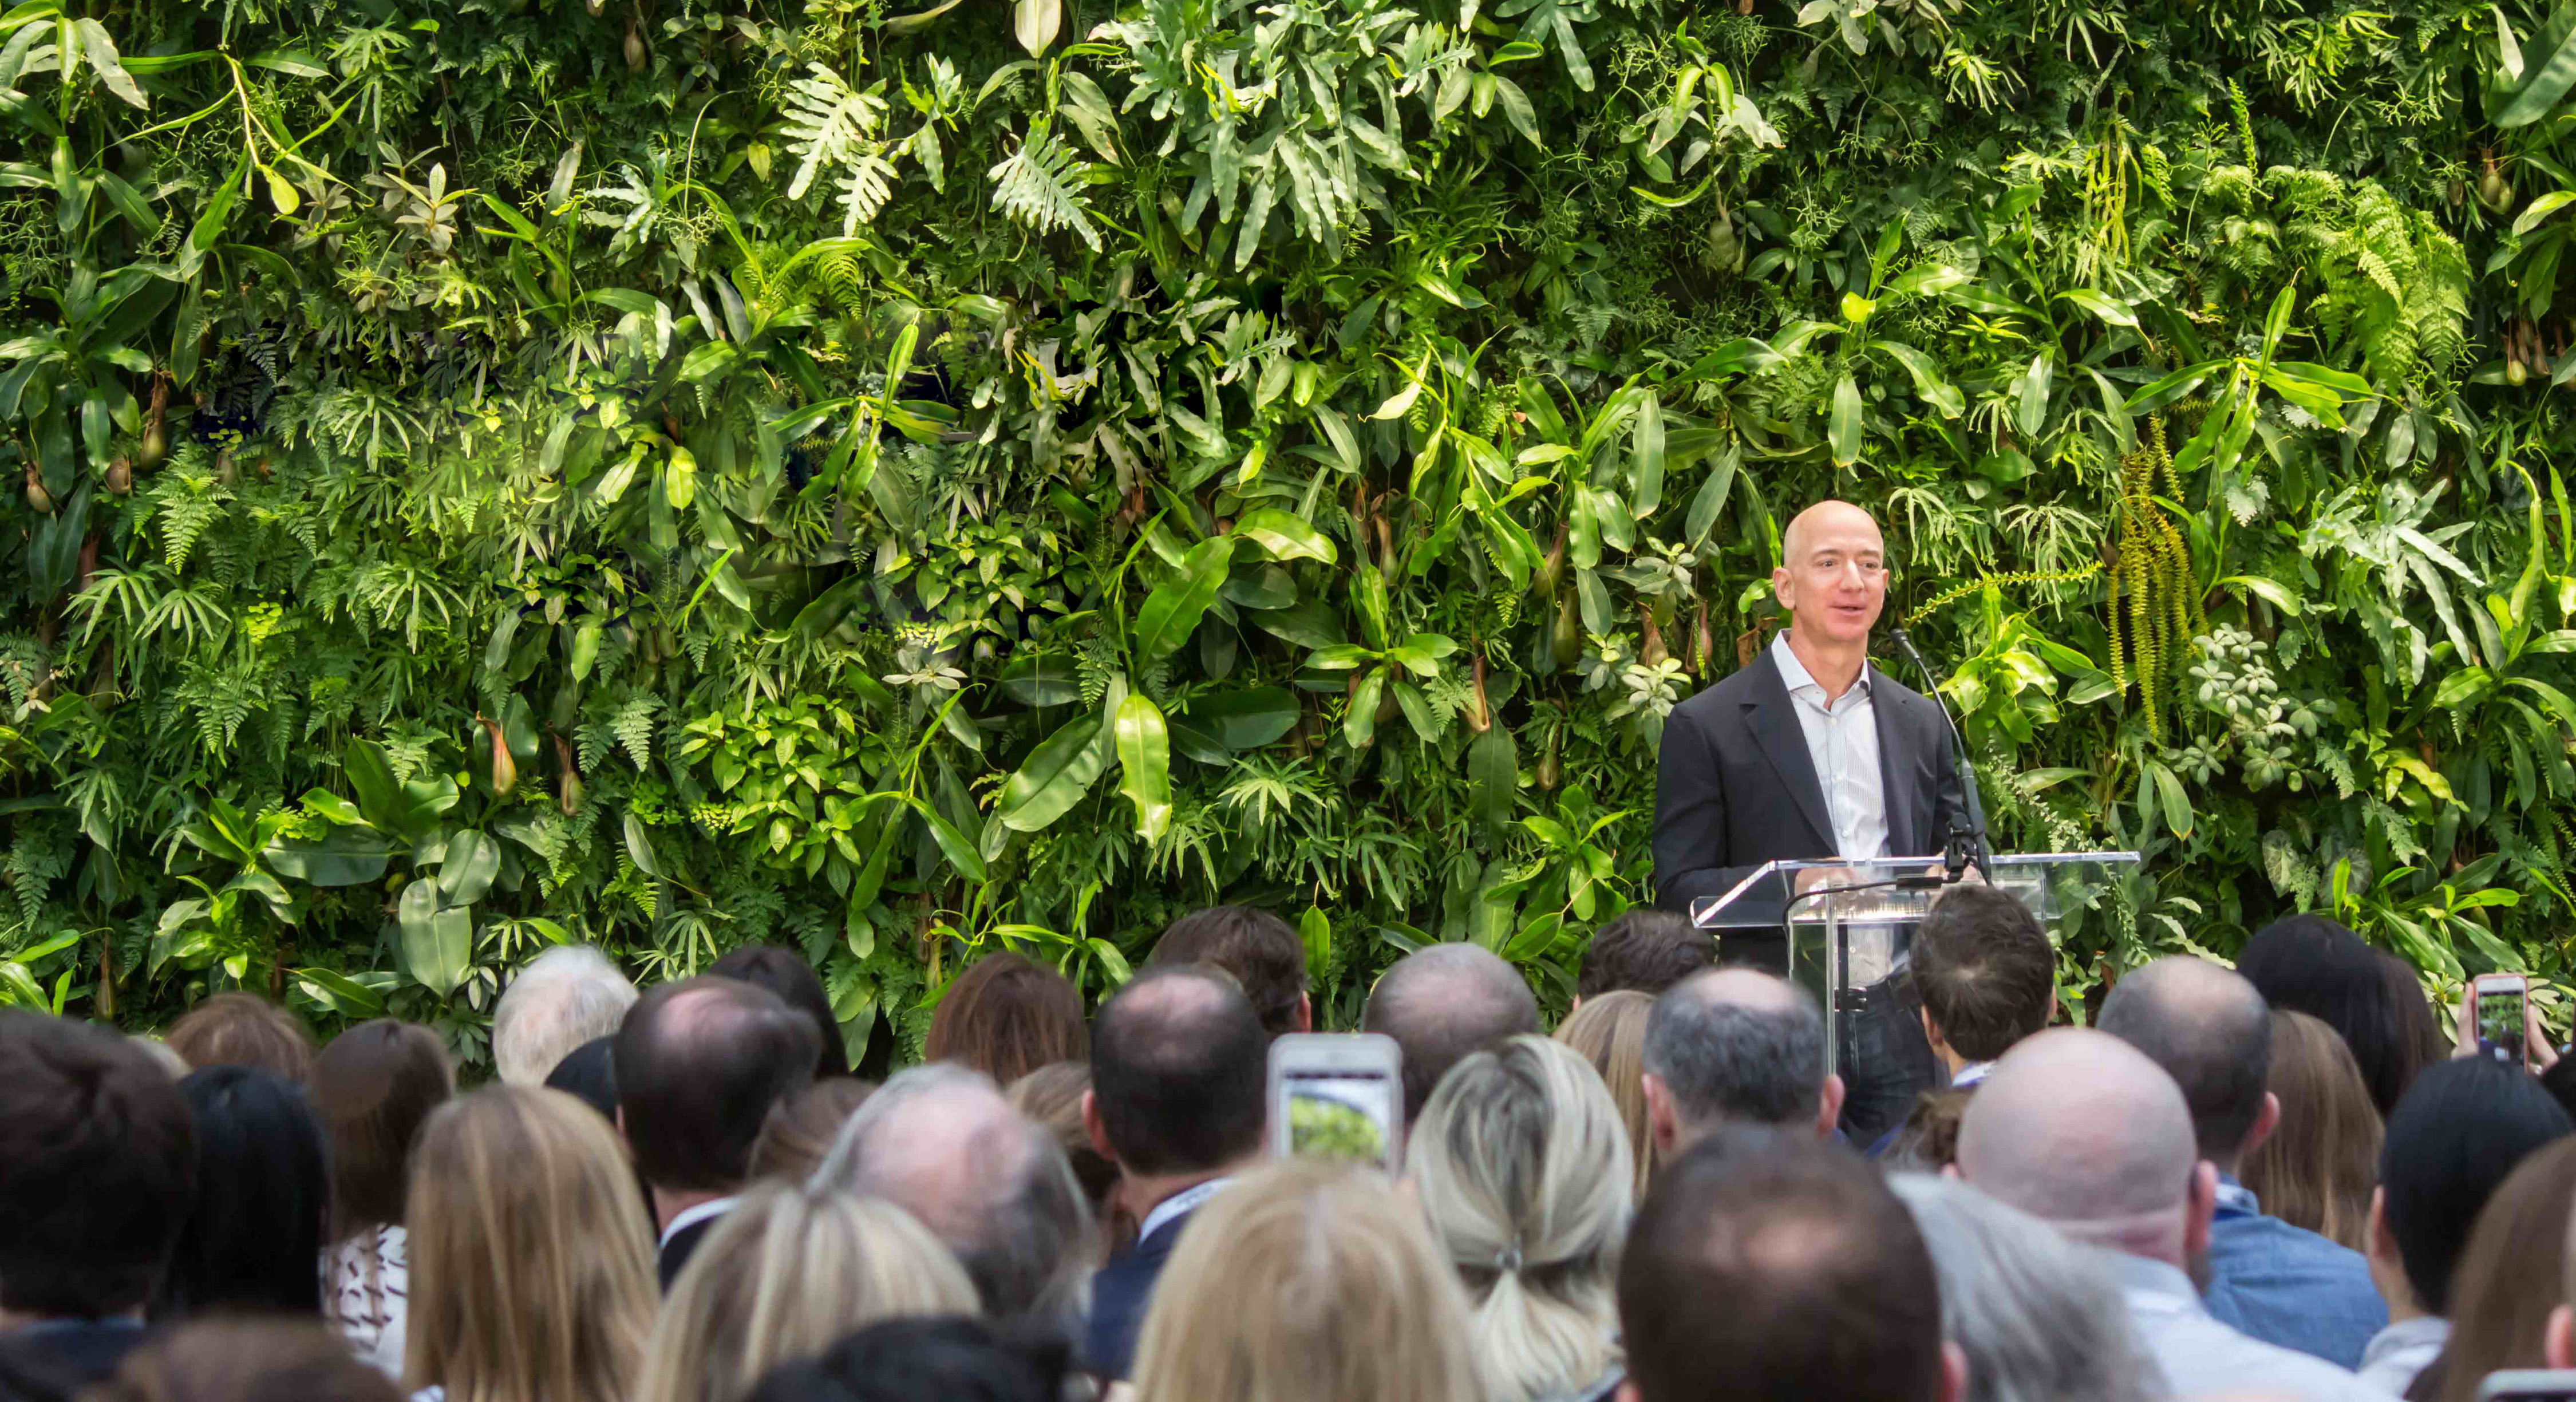 Can Rockefeller, Bezos and IKEA turn the developing world green?